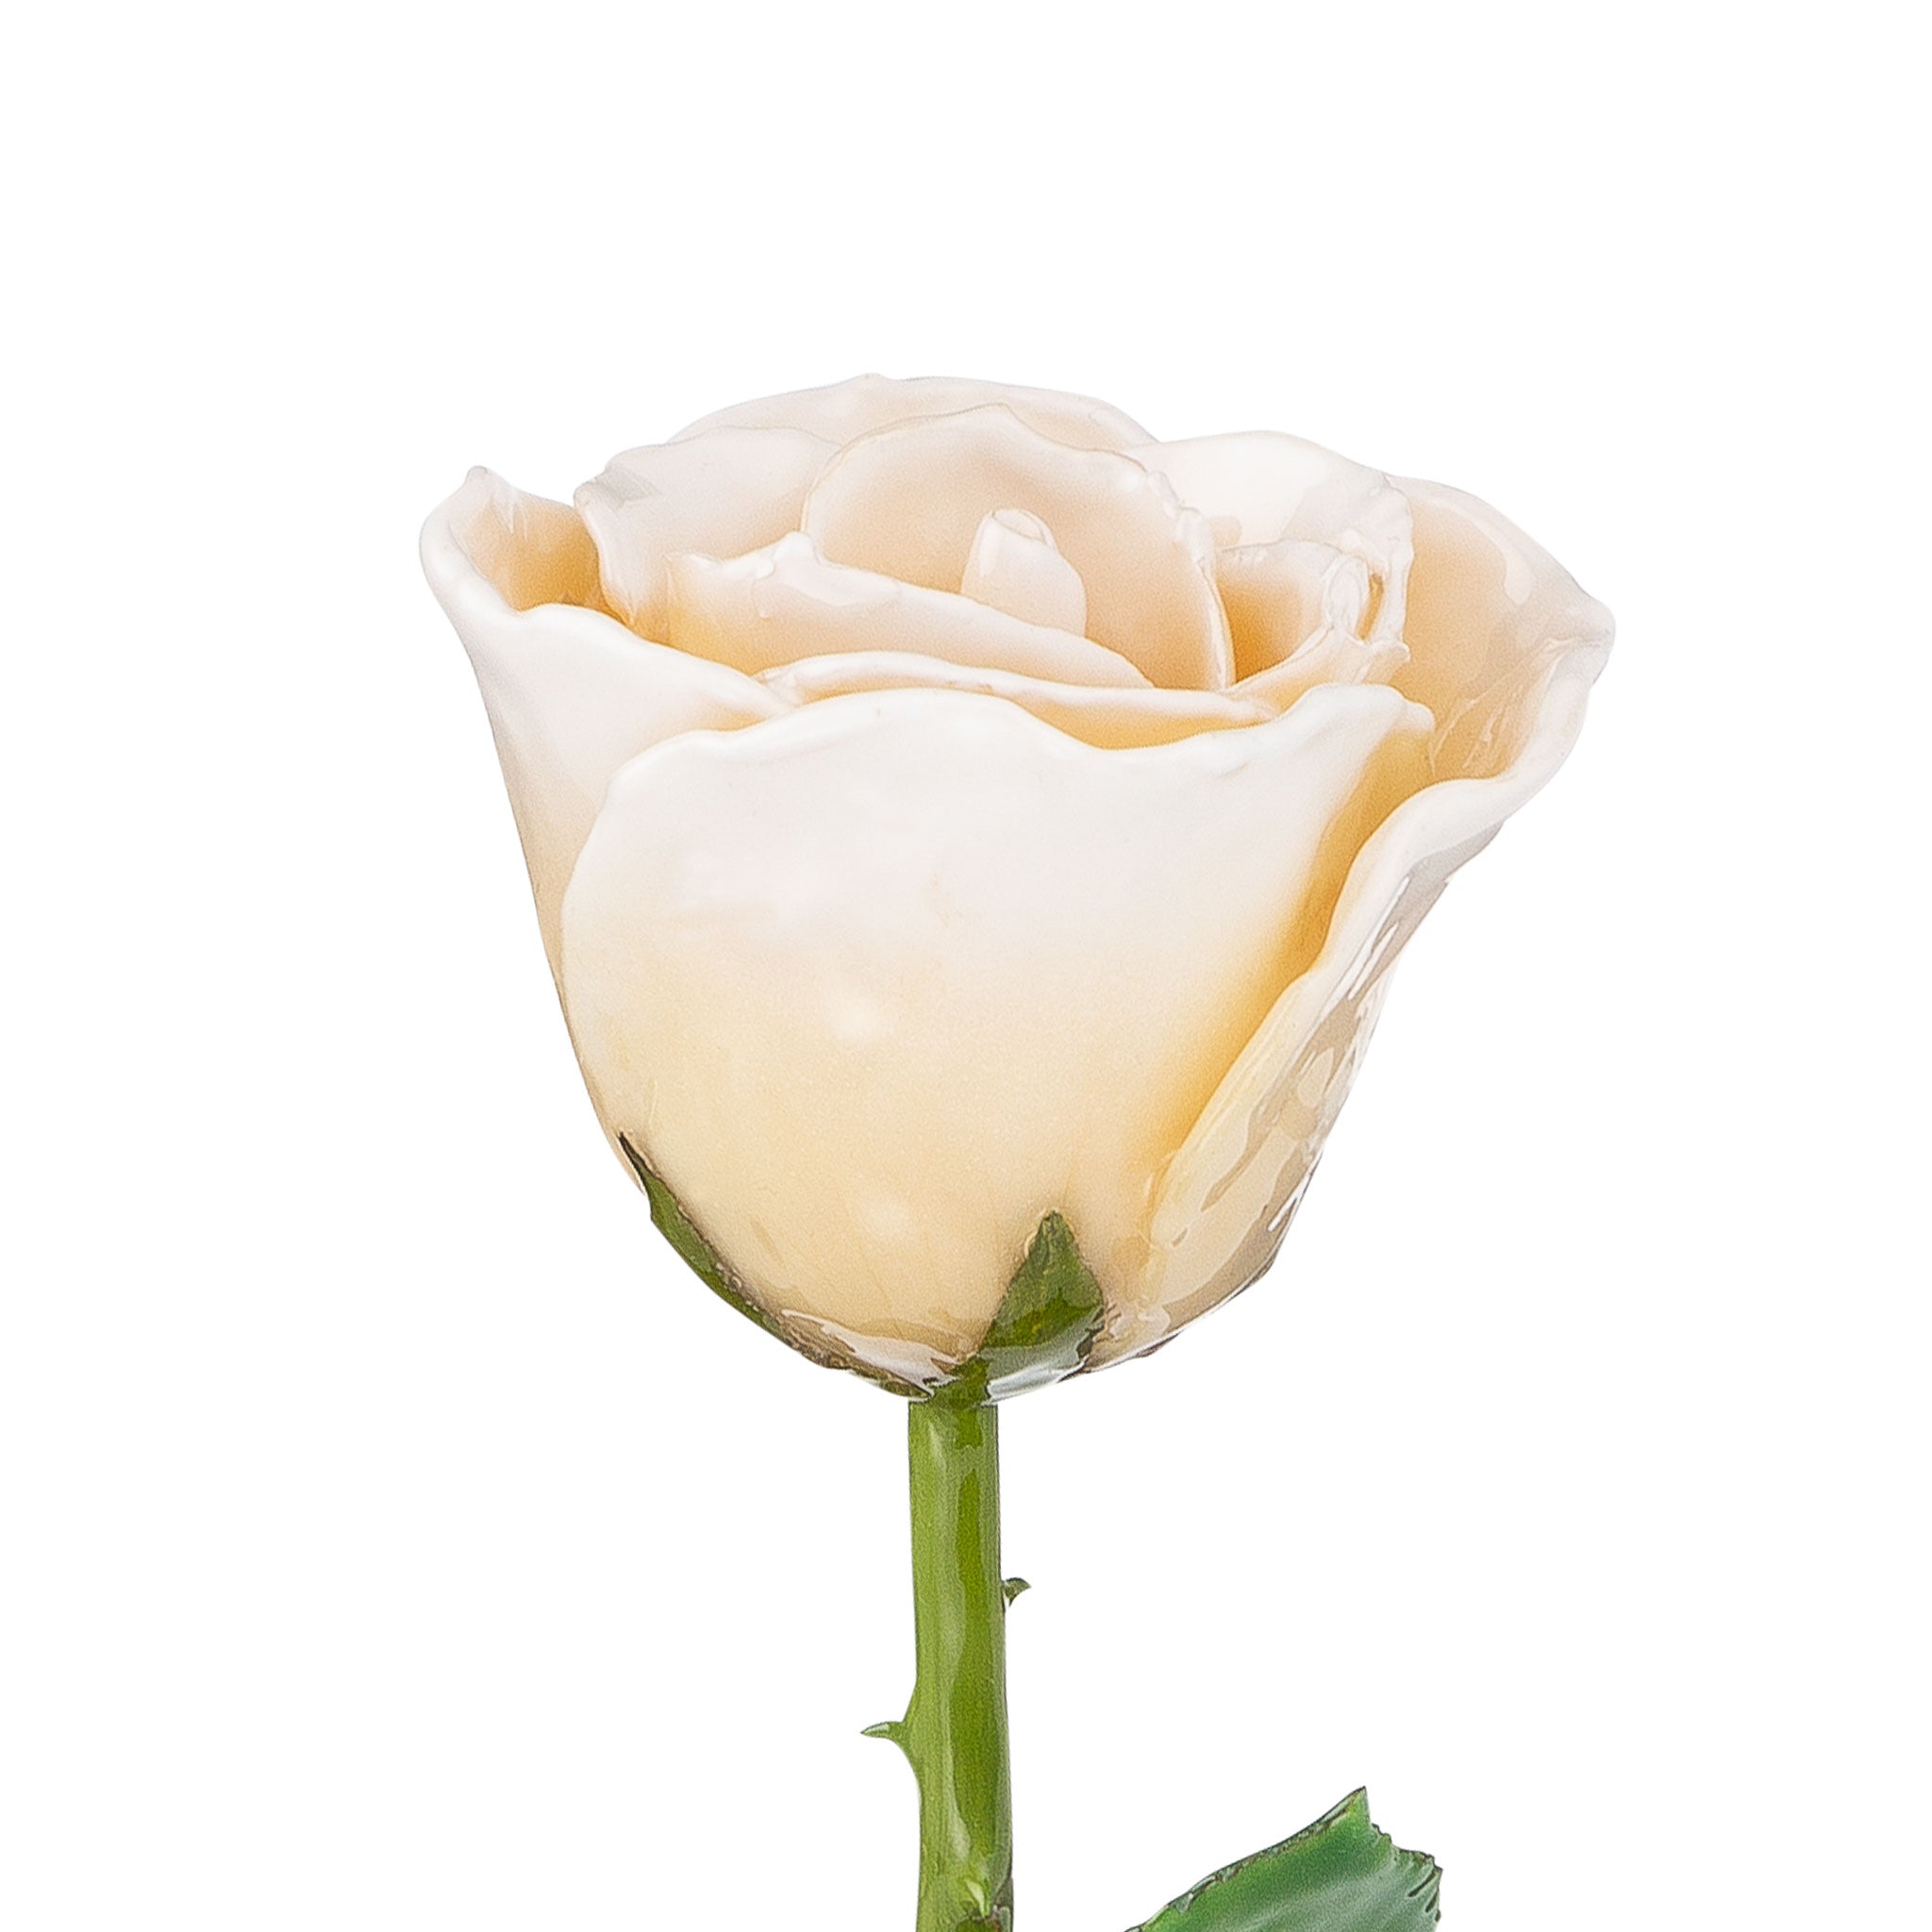 Natural (Green Stem) Forever Rose with White Colored Petals. View of Stem, Leaves, and Rose Petals. This a Forever Rose without any gold or other precious metals on it.